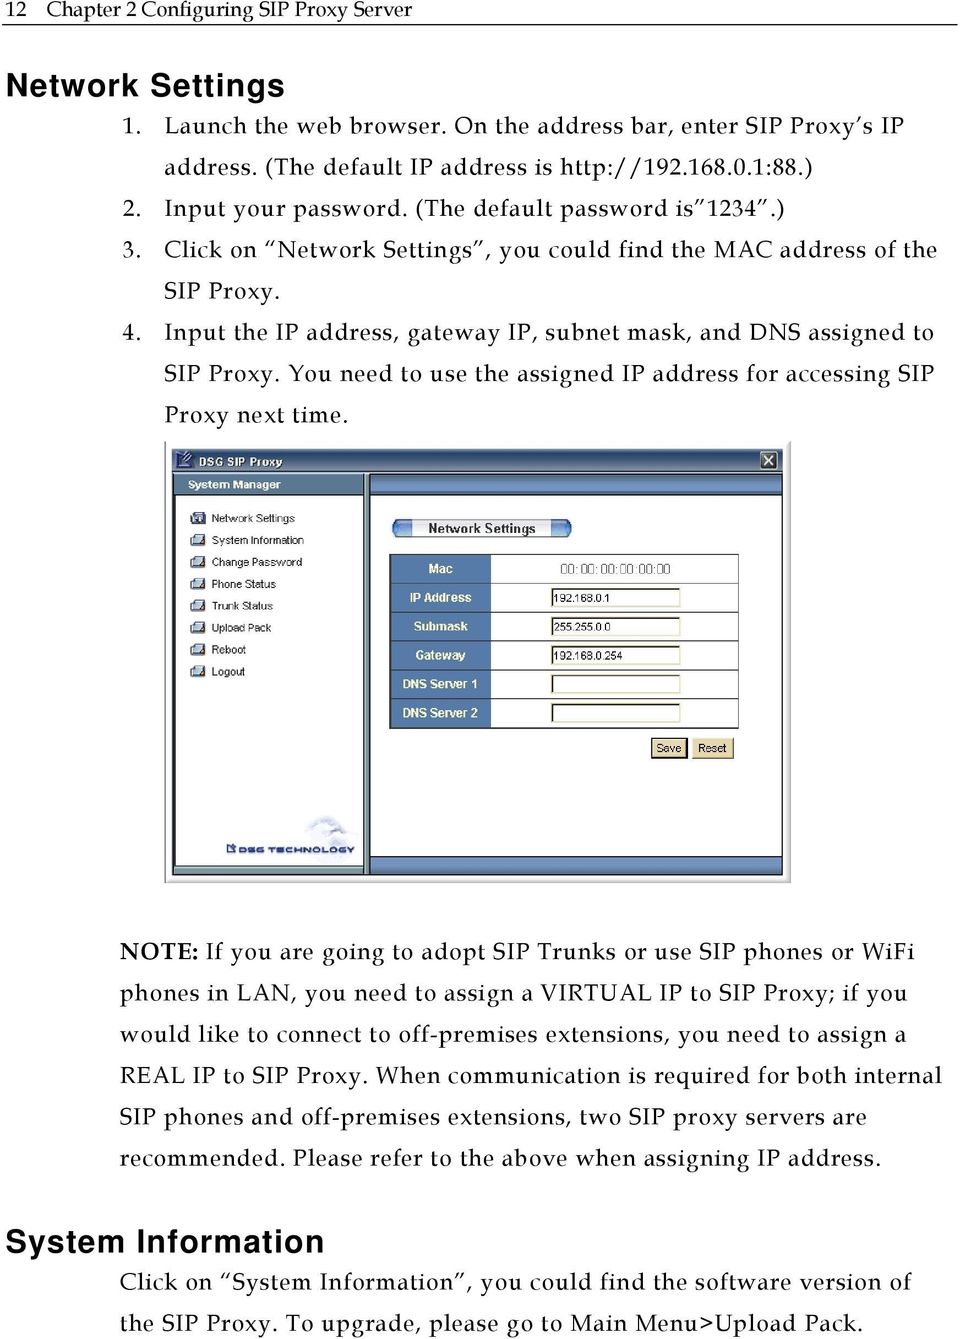 Input the IP address, gateway IP, subnet mask, and DNS assigned to SIP Proxy. You need to use the assigned IP address for accessing SIP Proxy next time.